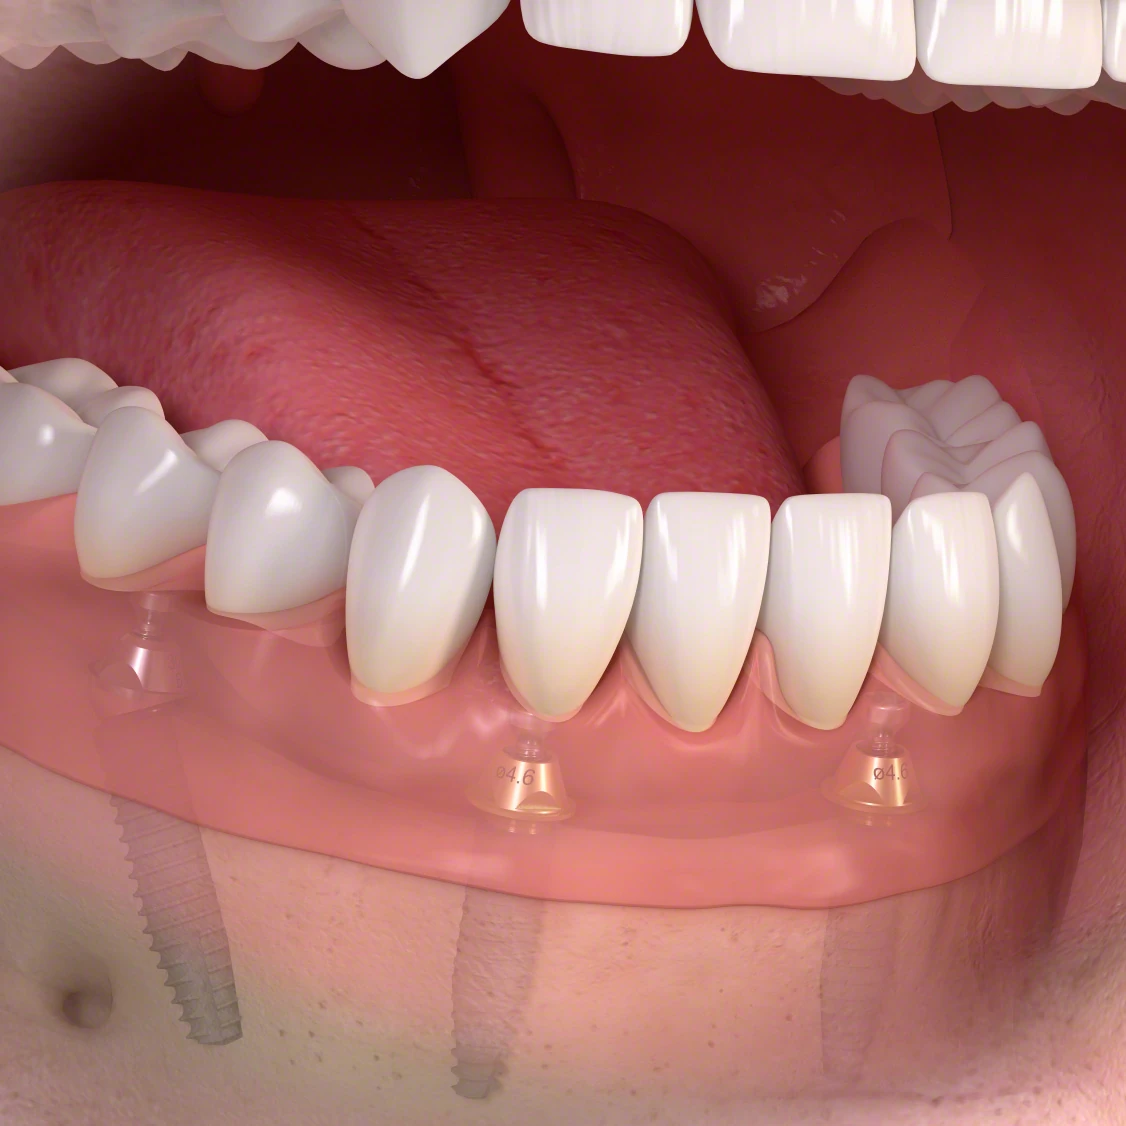 Stock image of a full arch tooth replacement